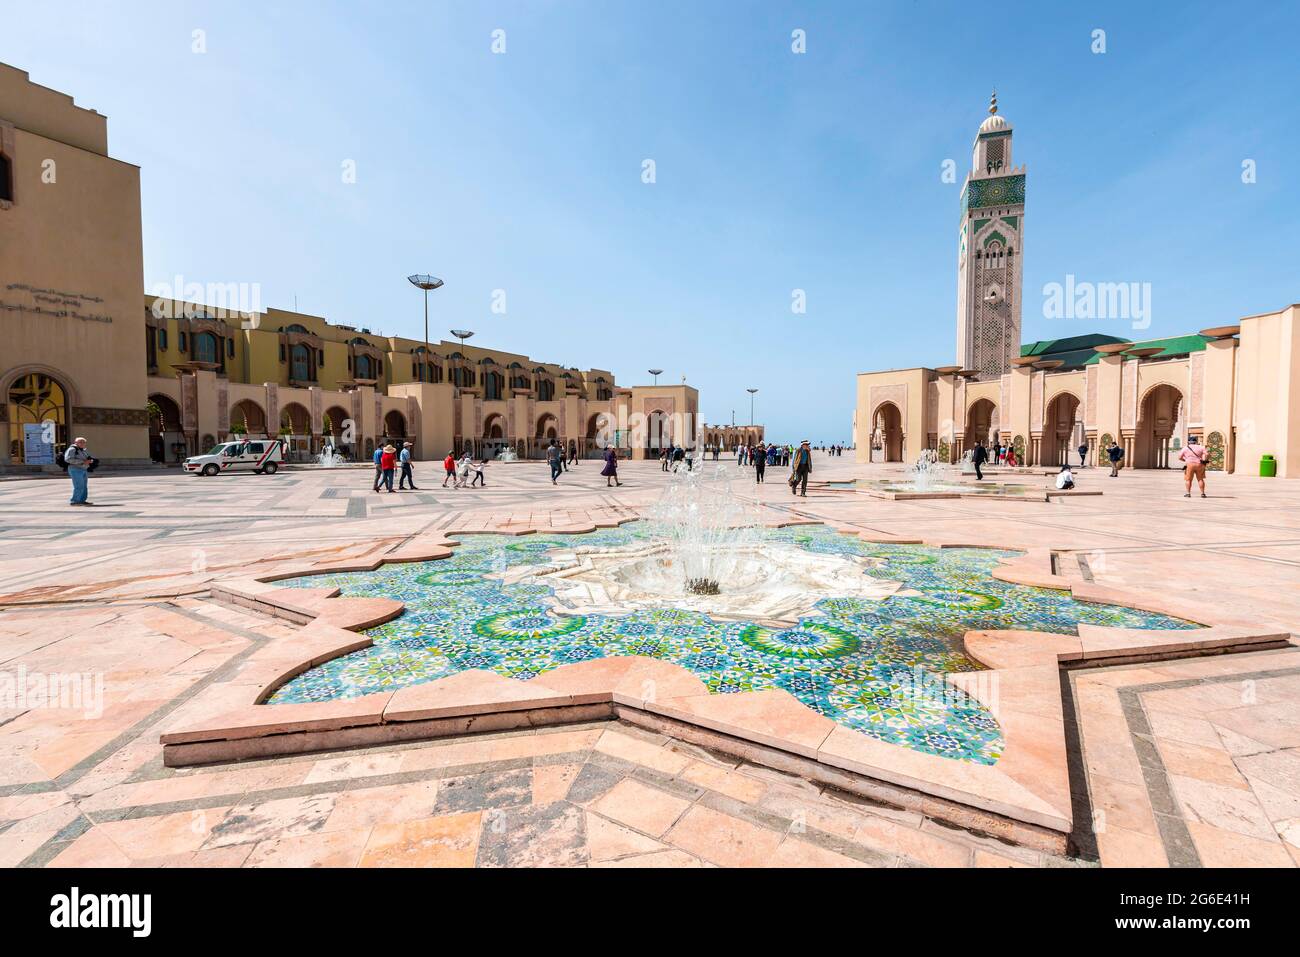 Star-shaped decorated fountain, Hassan II Mosque, Grande Mosquee Hassan II, Moorish architecture, with 210m highest minaret in the world Stock Photo